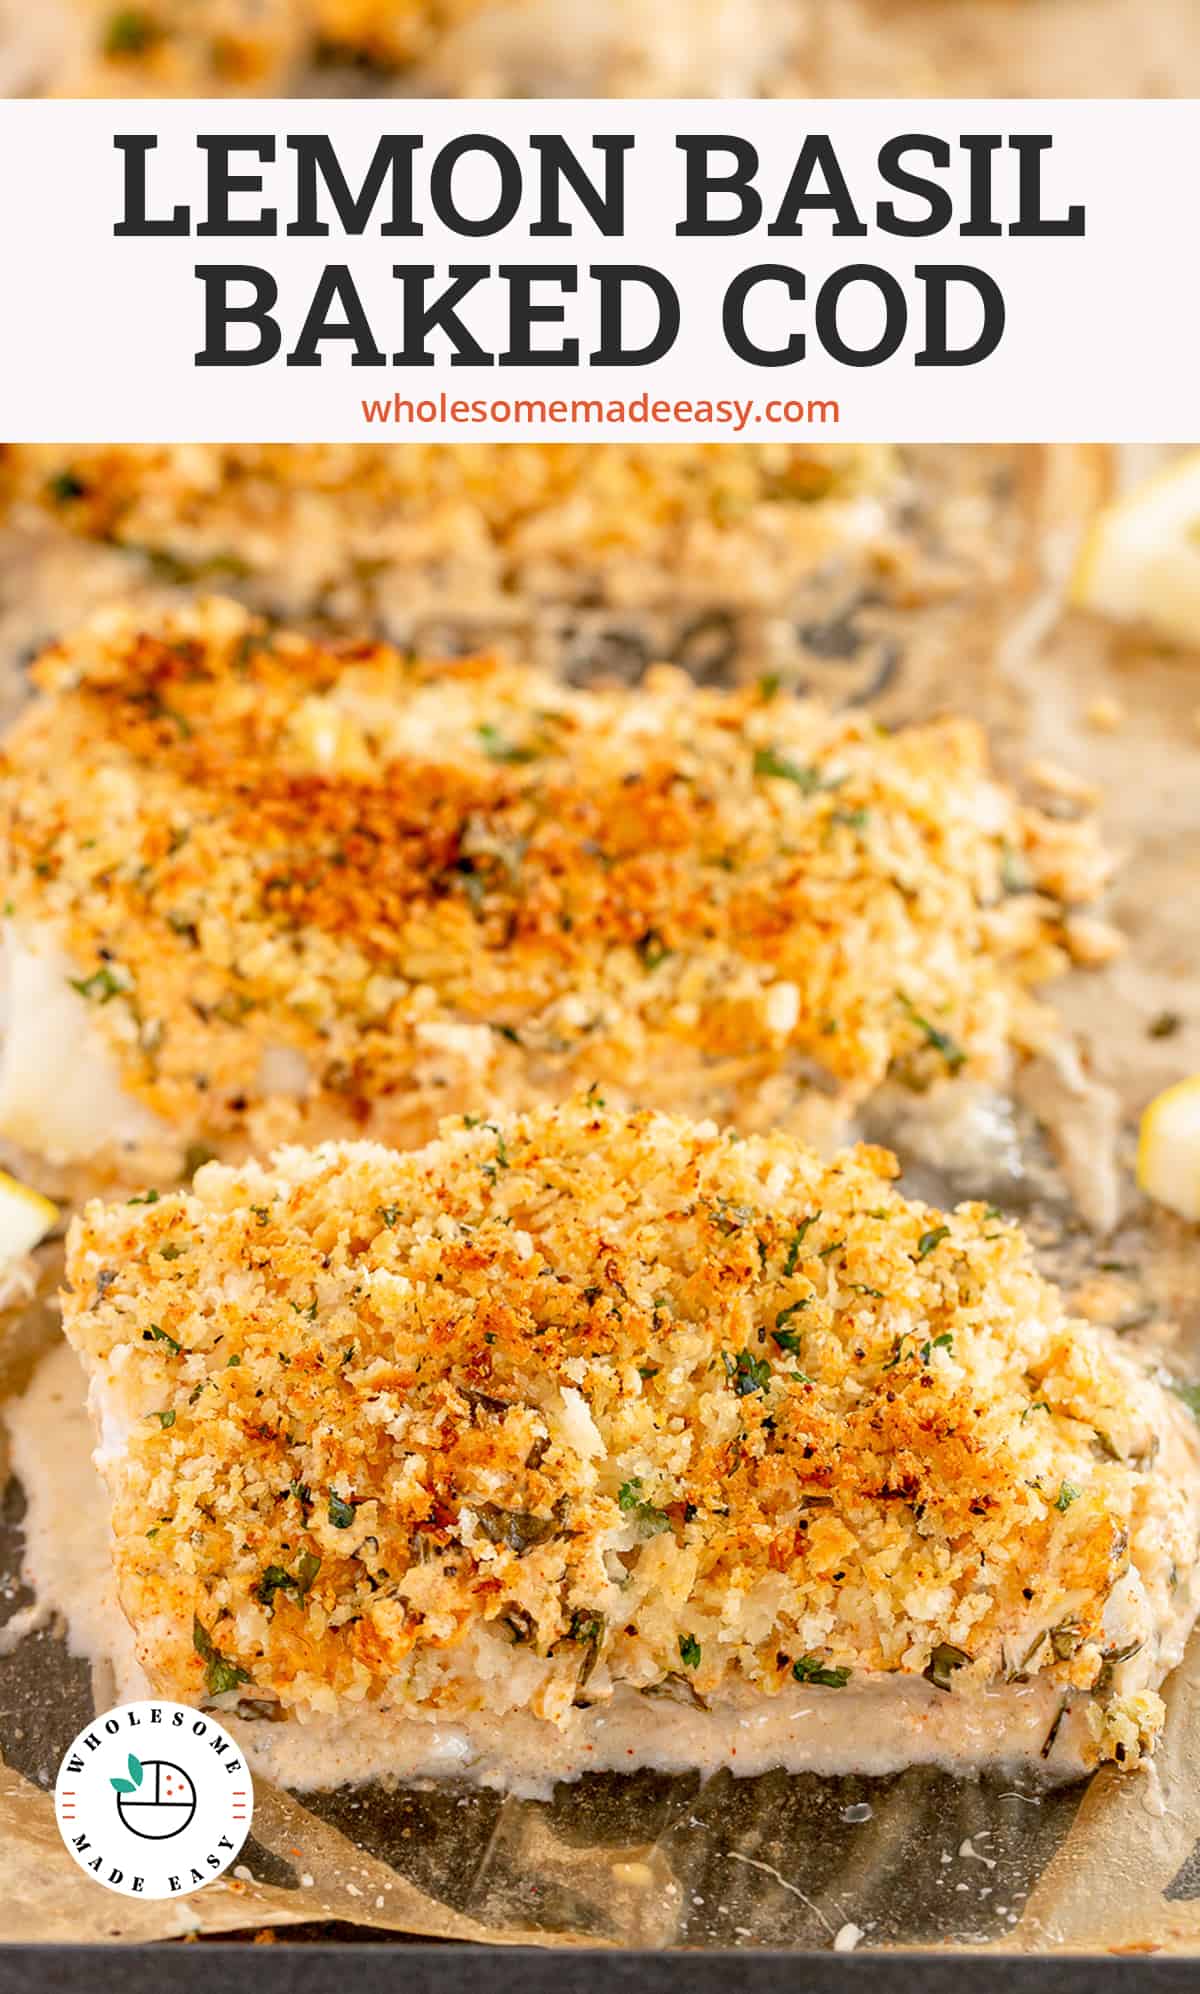 Lemon Basil Baked Cod fillets on a baking sheet with text overlay.